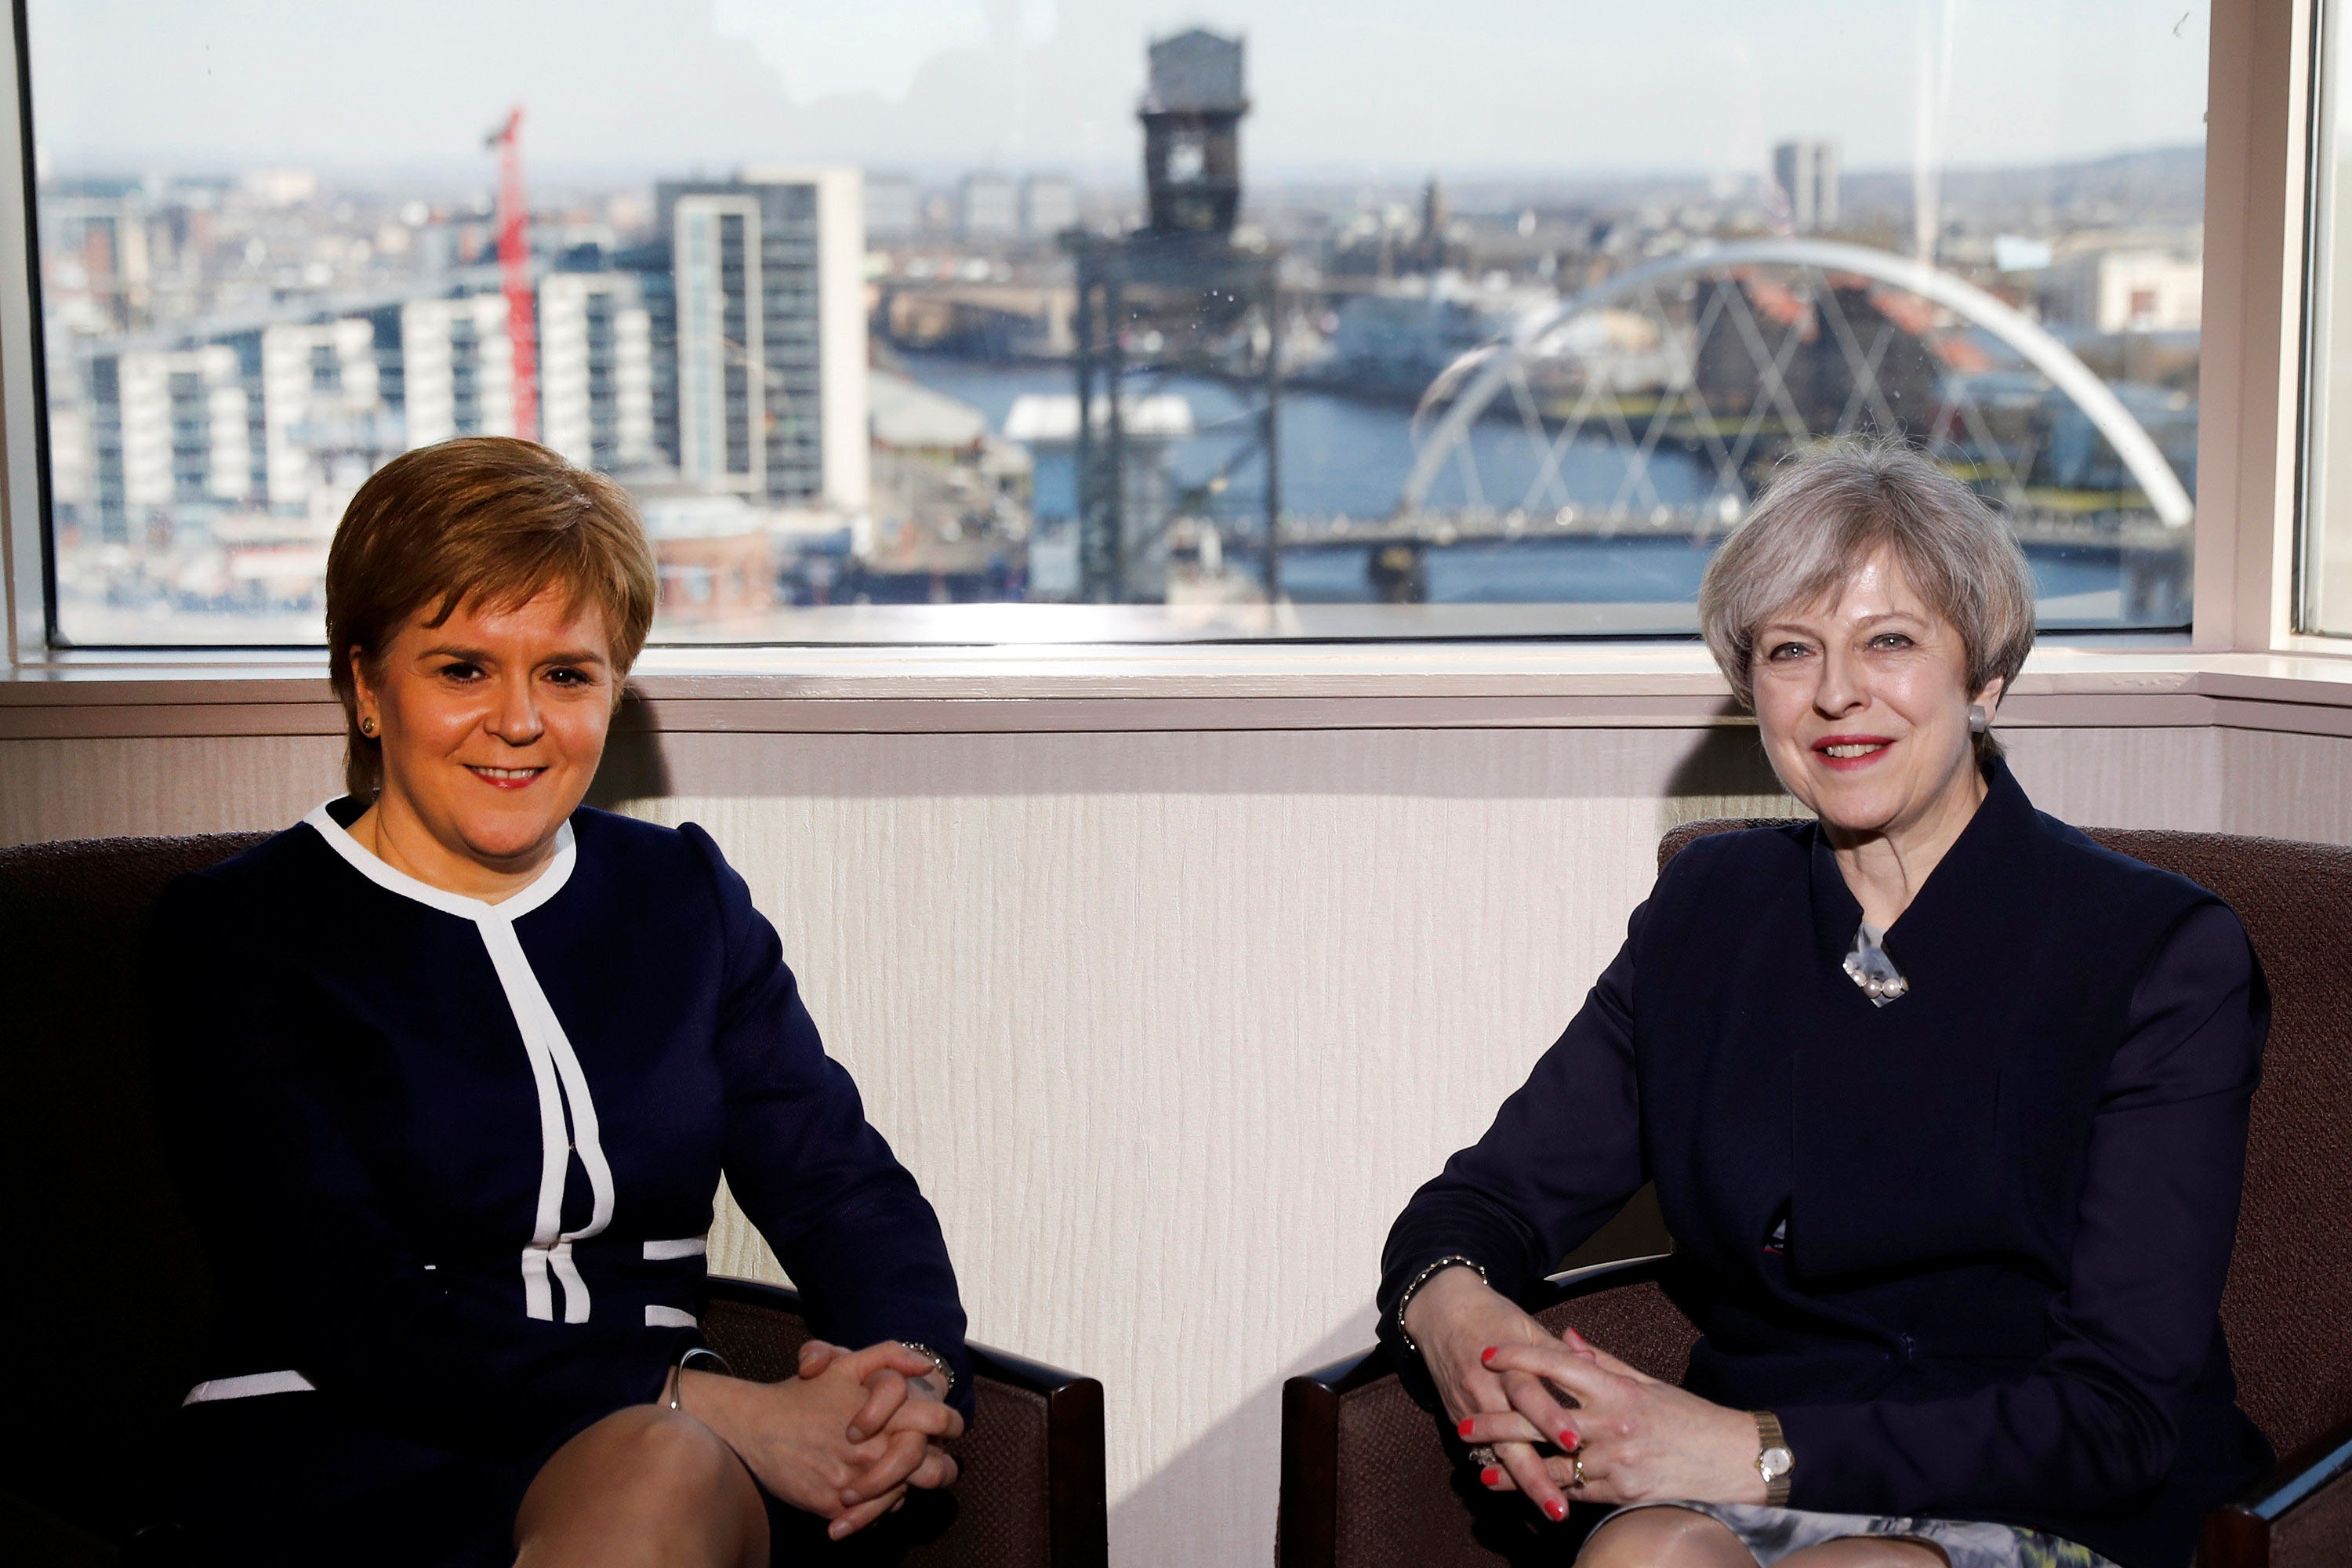 Britain's Prime Minister Theresa May and Scotland's First Minister Nicola Sturgeon meet in a hotel in Glasgow, Scotland, on March 27, 2017. Photo: Reuters